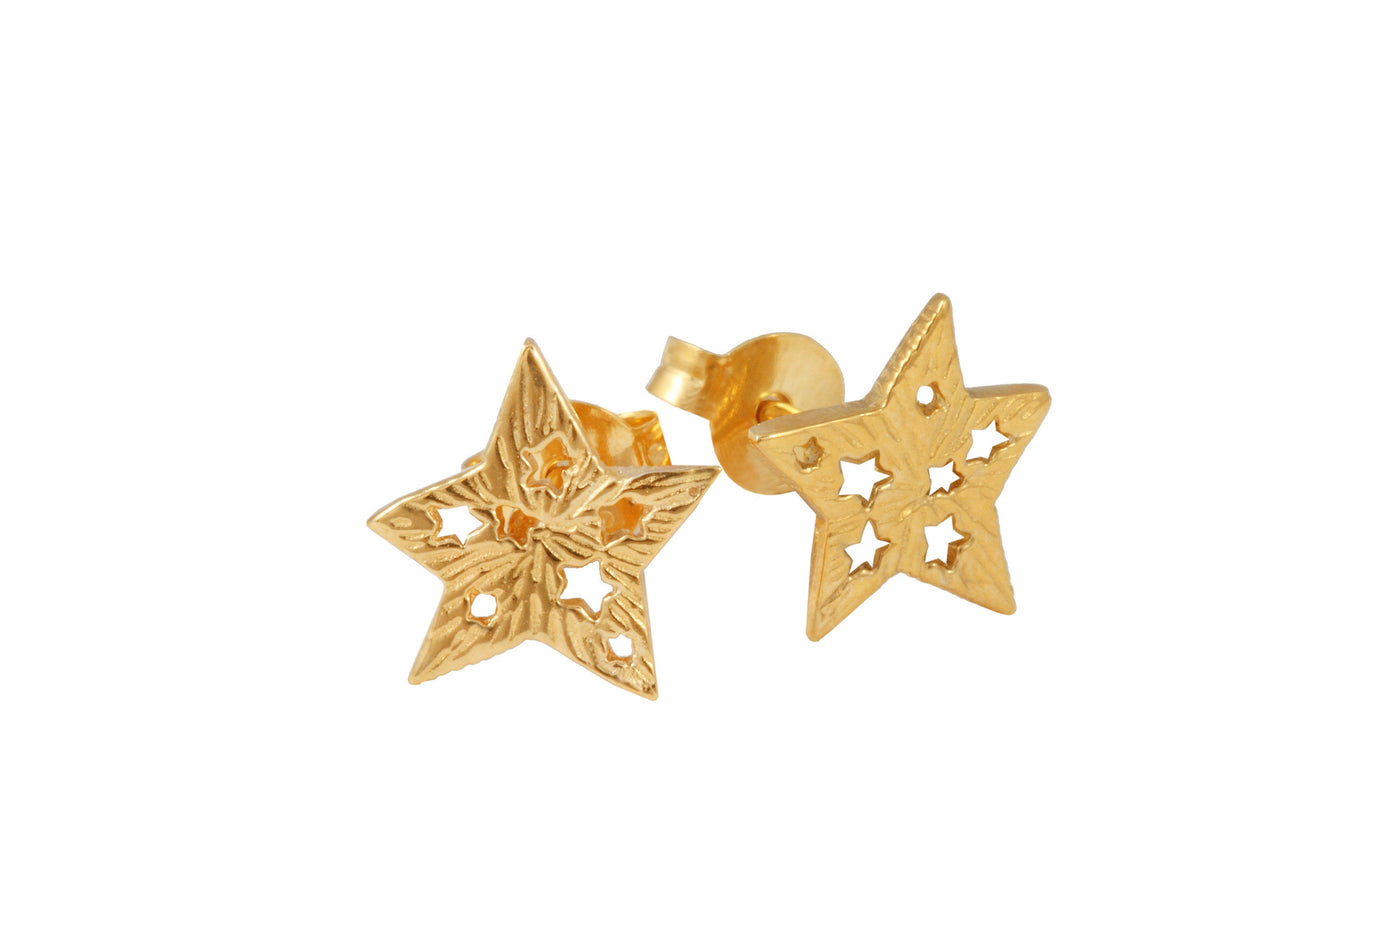 5-poined Star stud earrings. Silver, gold-plated